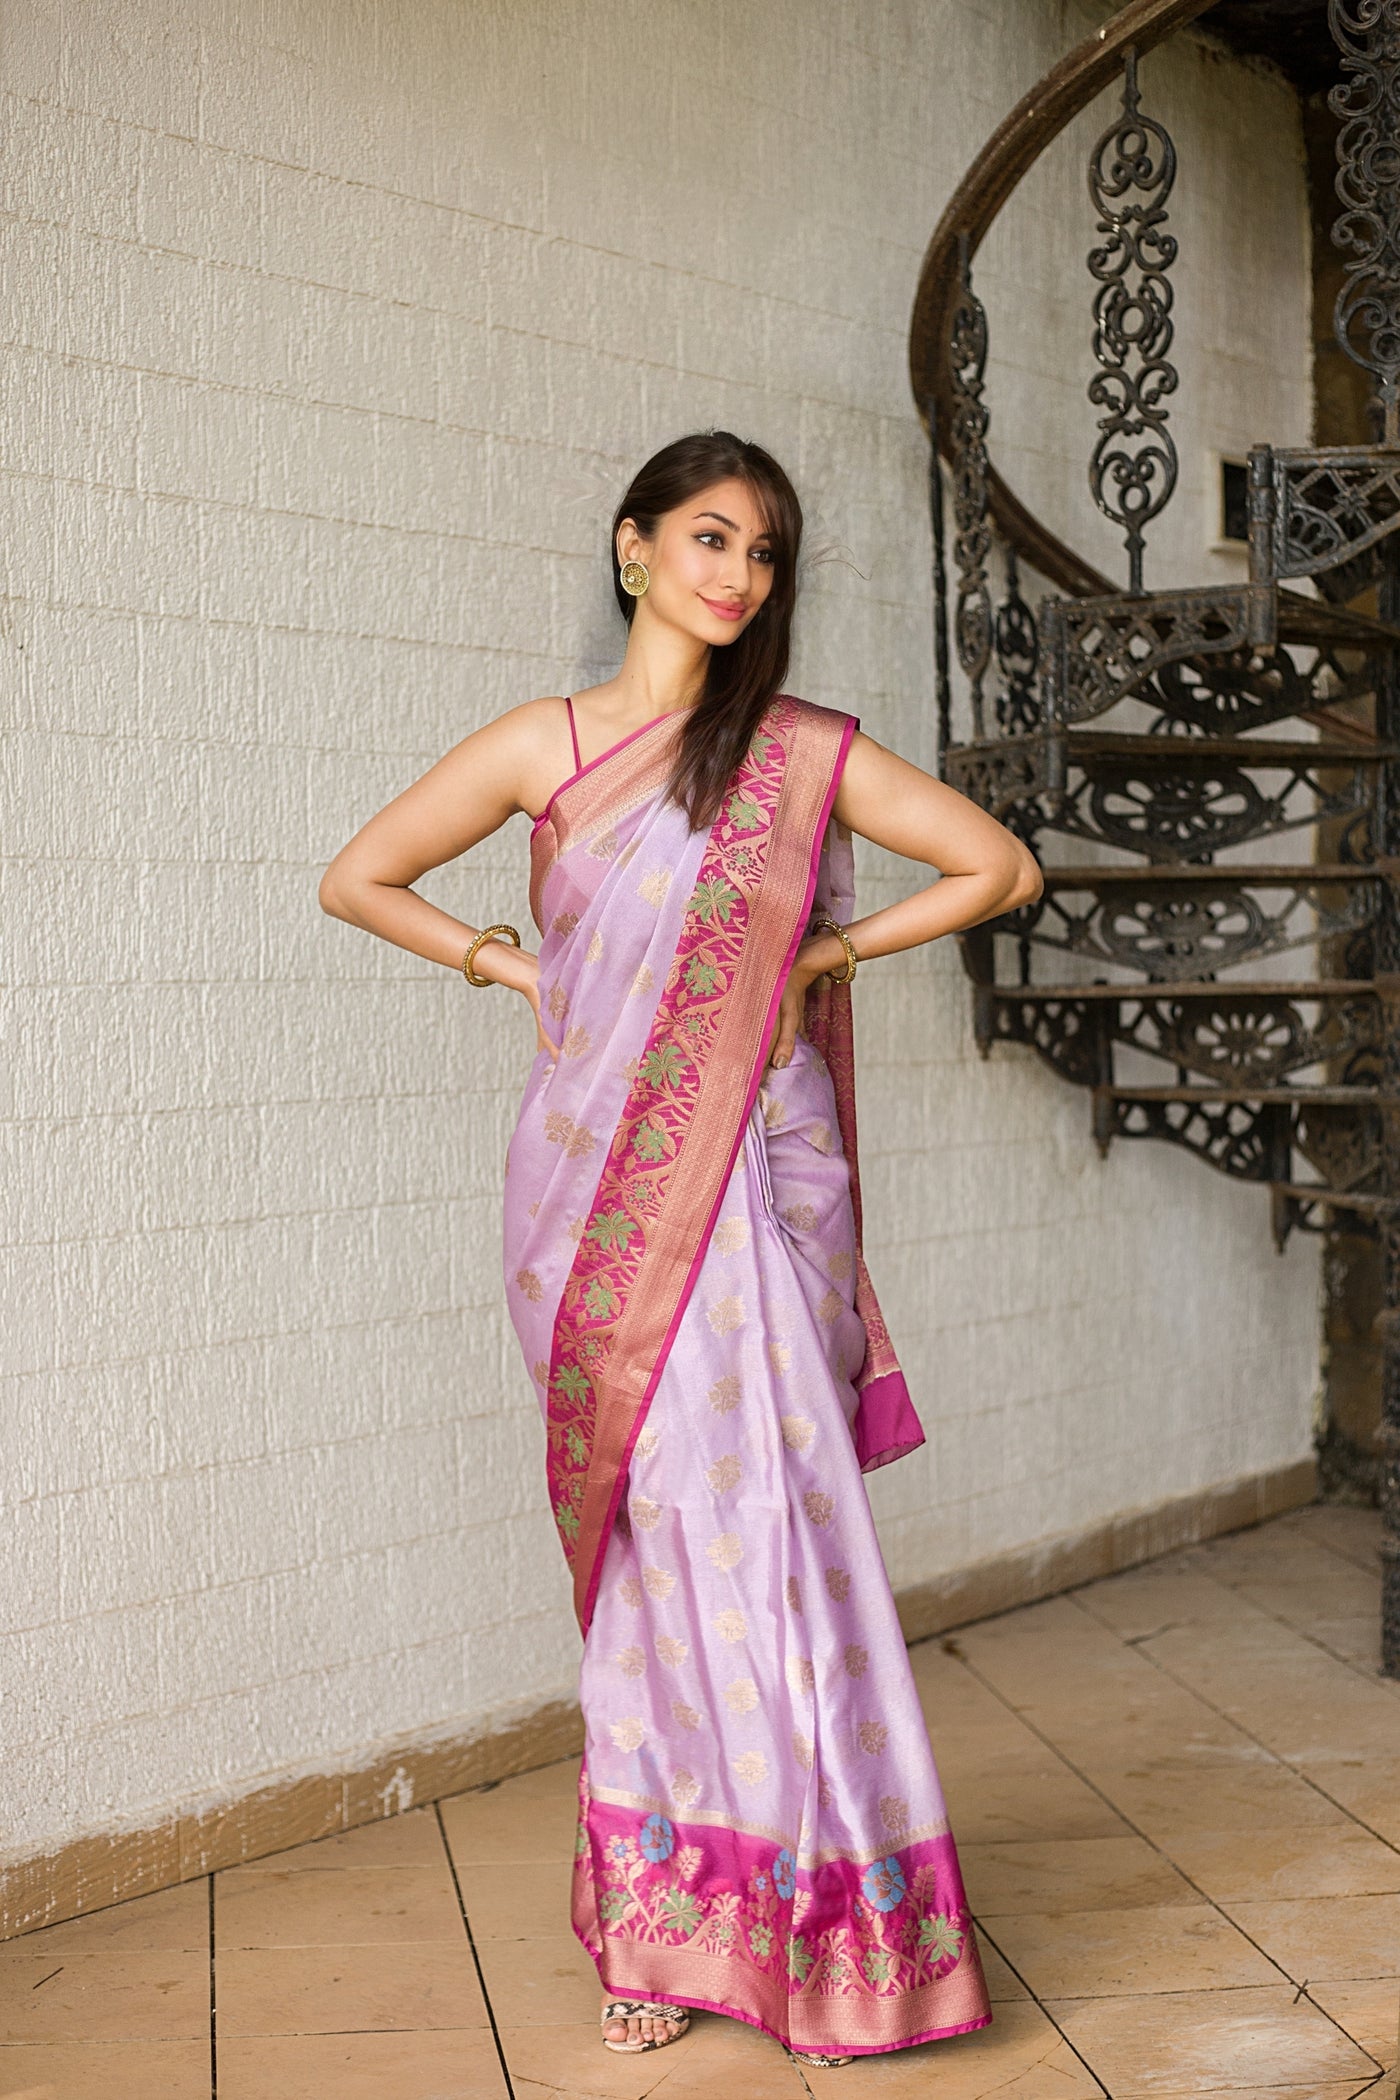 Purple Floral Trimmed Banarasi Saree Indian Clothing in Denver, CO, Aurora, CO, Boulder, CO, Fort Collins, CO, Colorado Springs, CO, Parker, CO, Highlands Ranch, CO, Cherry Creek, CO, Centennial, CO, and Longmont, CO. NATIONWIDE SHIPPING USA- India Fashion X